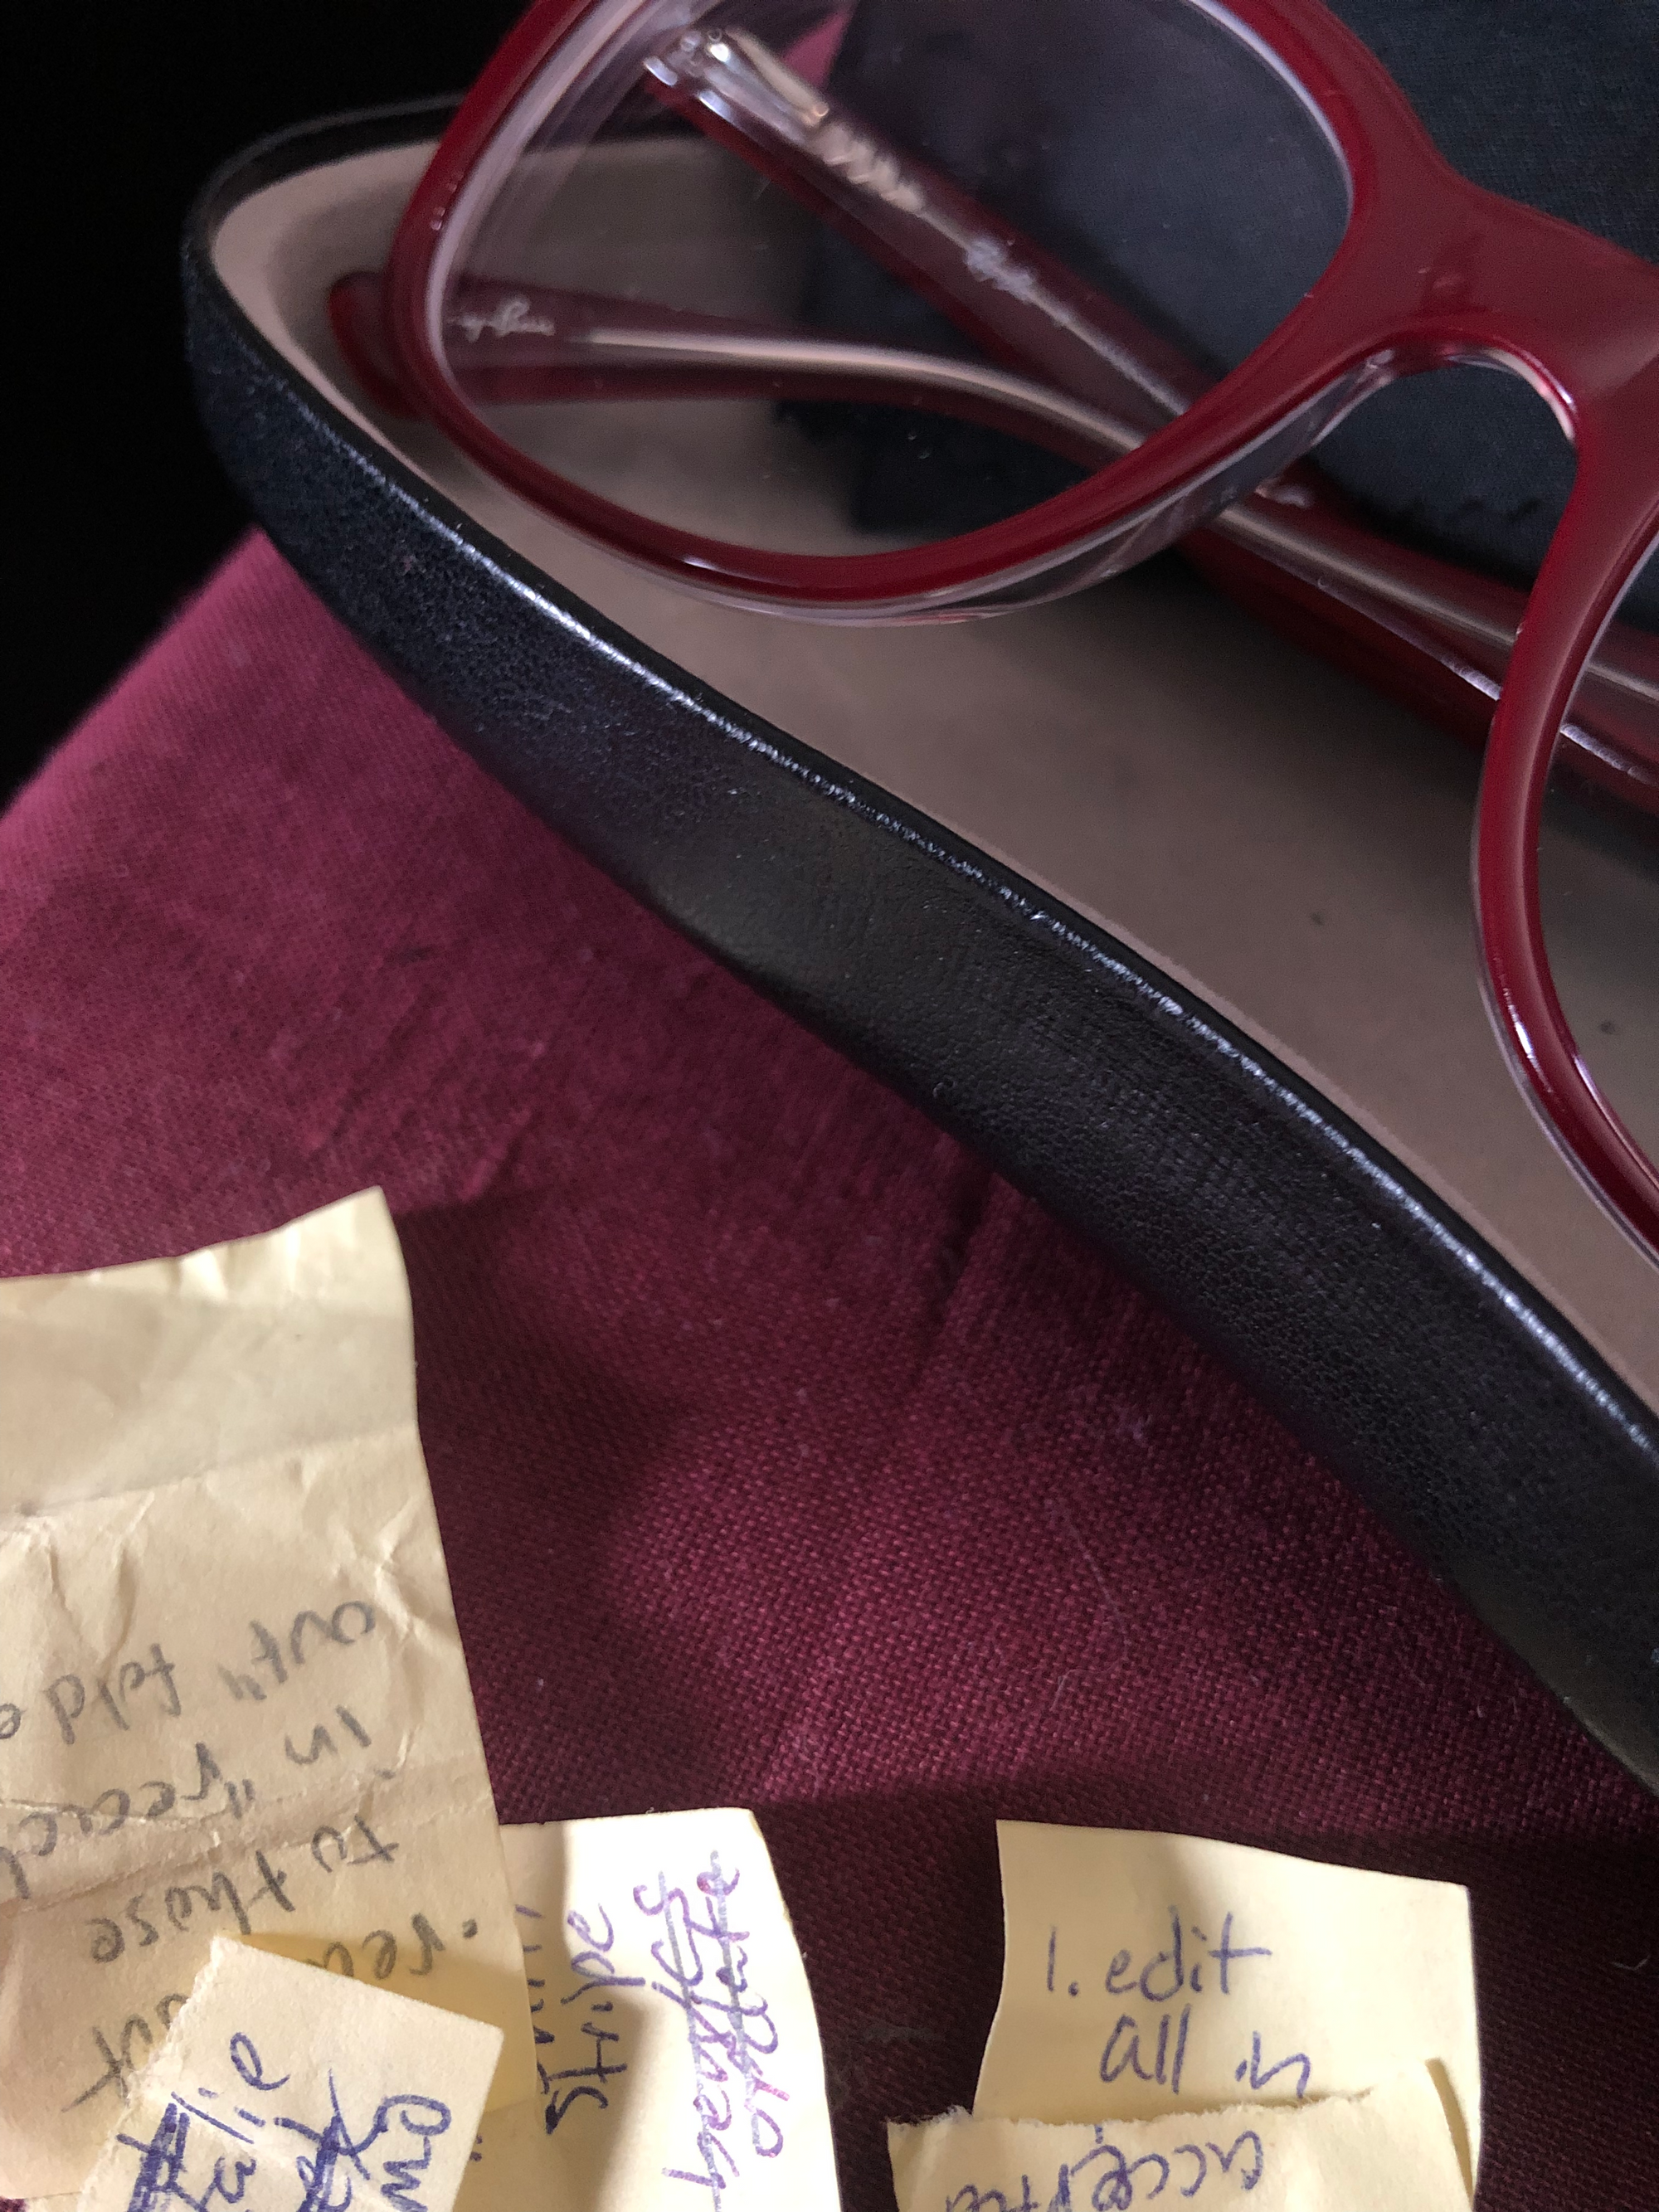 close-up photo of an open black glasses case with red Ray-Ban eyeglasses sitting inside, next to a bunch of crumpled Post-Its with writing on them, a few words legible: "to those in... out fold", "Stripe", "1. edit all in". taken at the robledo art, strike! headquarters, february 2023.